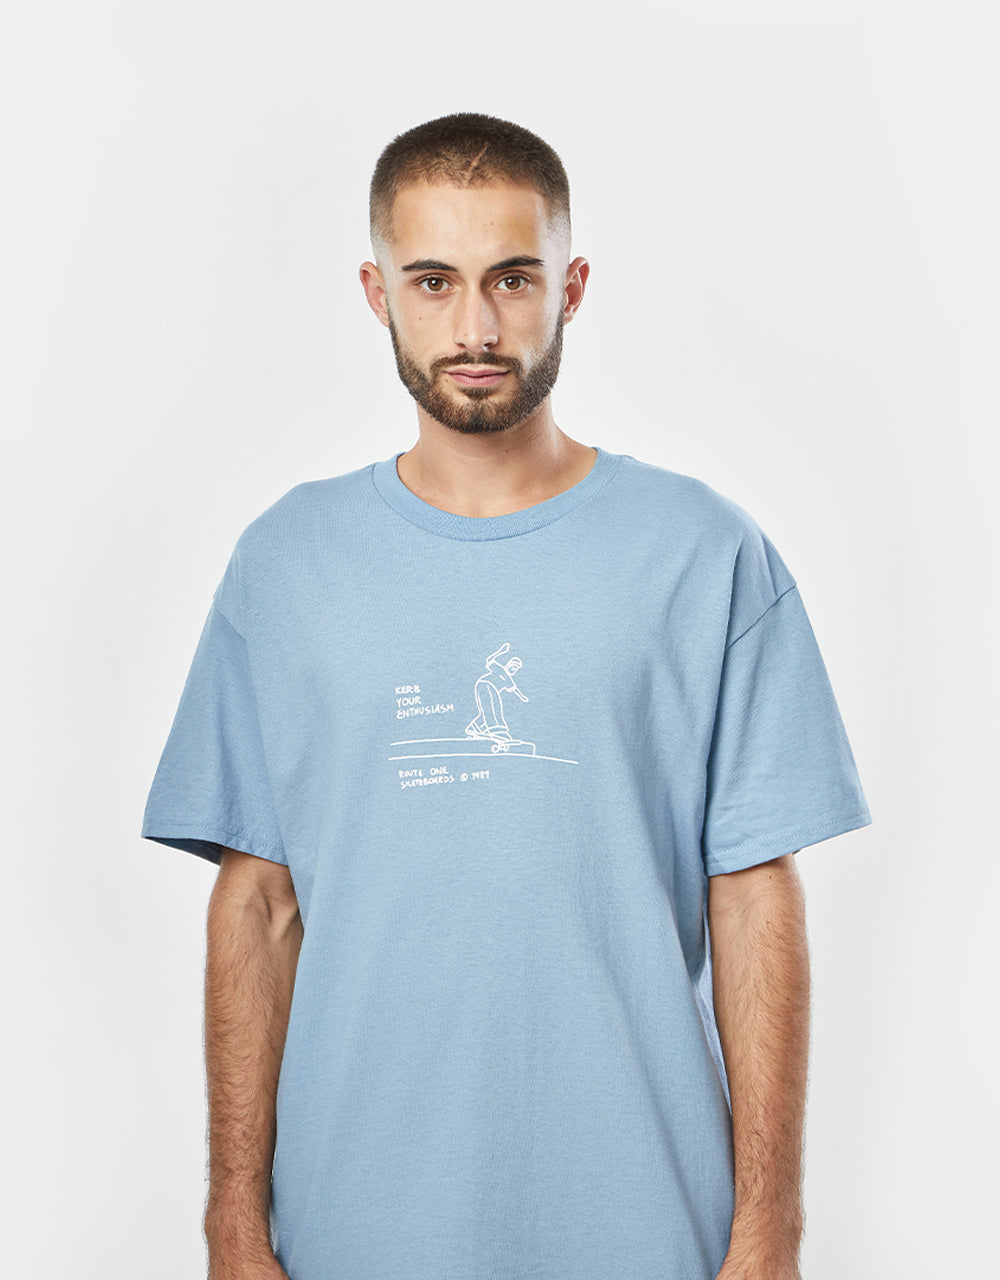 Route One Enthusiasm T-Shirt - Stone Blue